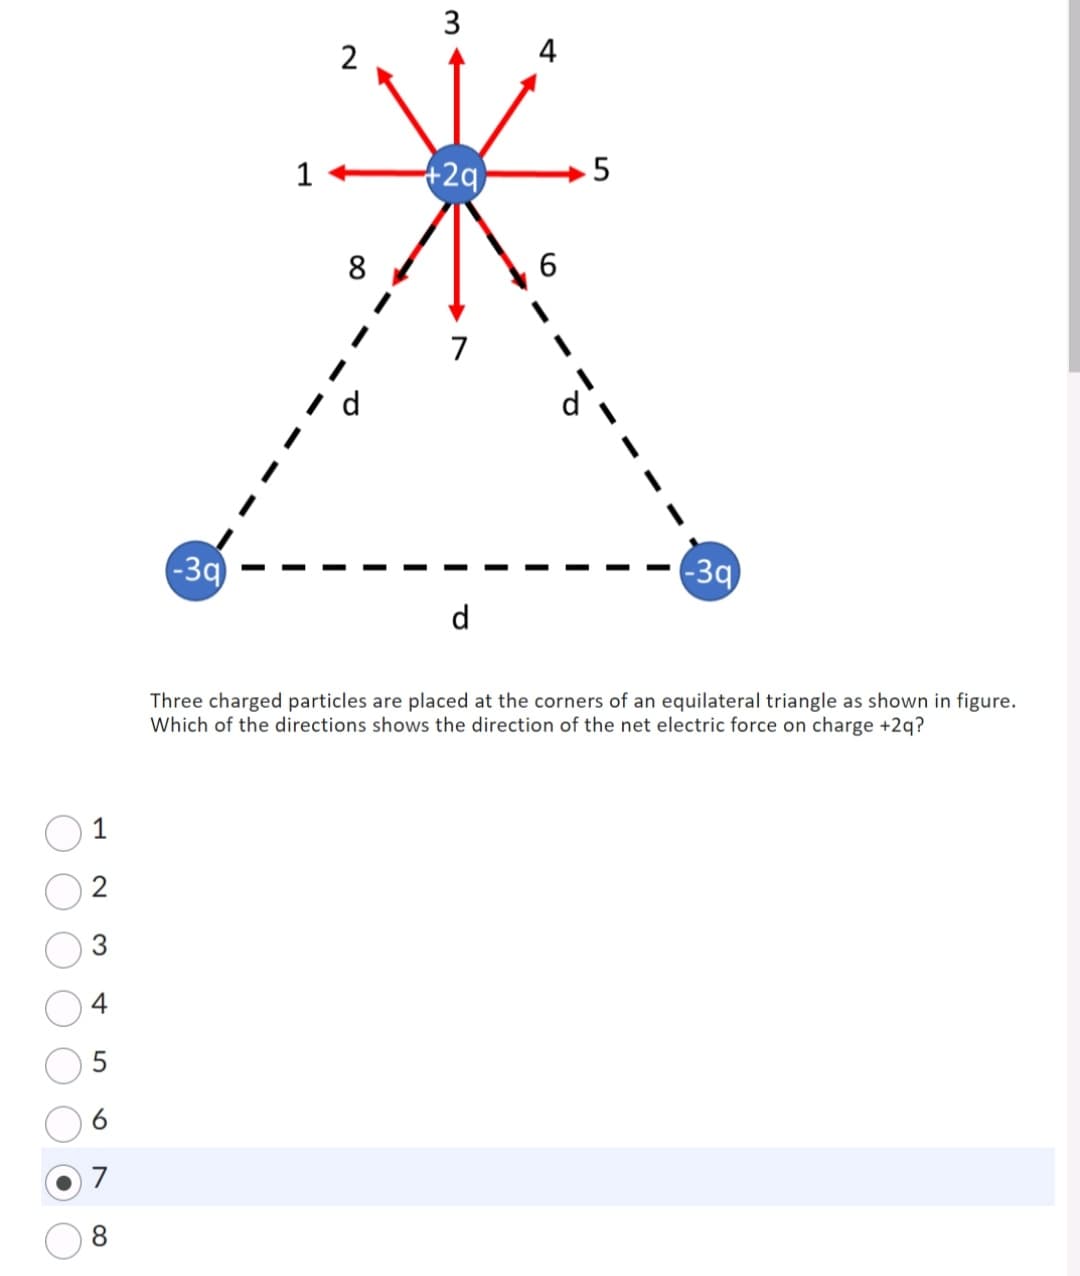 T
N
3
4
5
∞
-3q
1
2
8
3
+29
7
d
4
6
5
-3q
Three charged particles are placed at the corners of an equilateral triangle as shown in figure.
Which of the directions shows the direction of the net electric force on charge +2q?